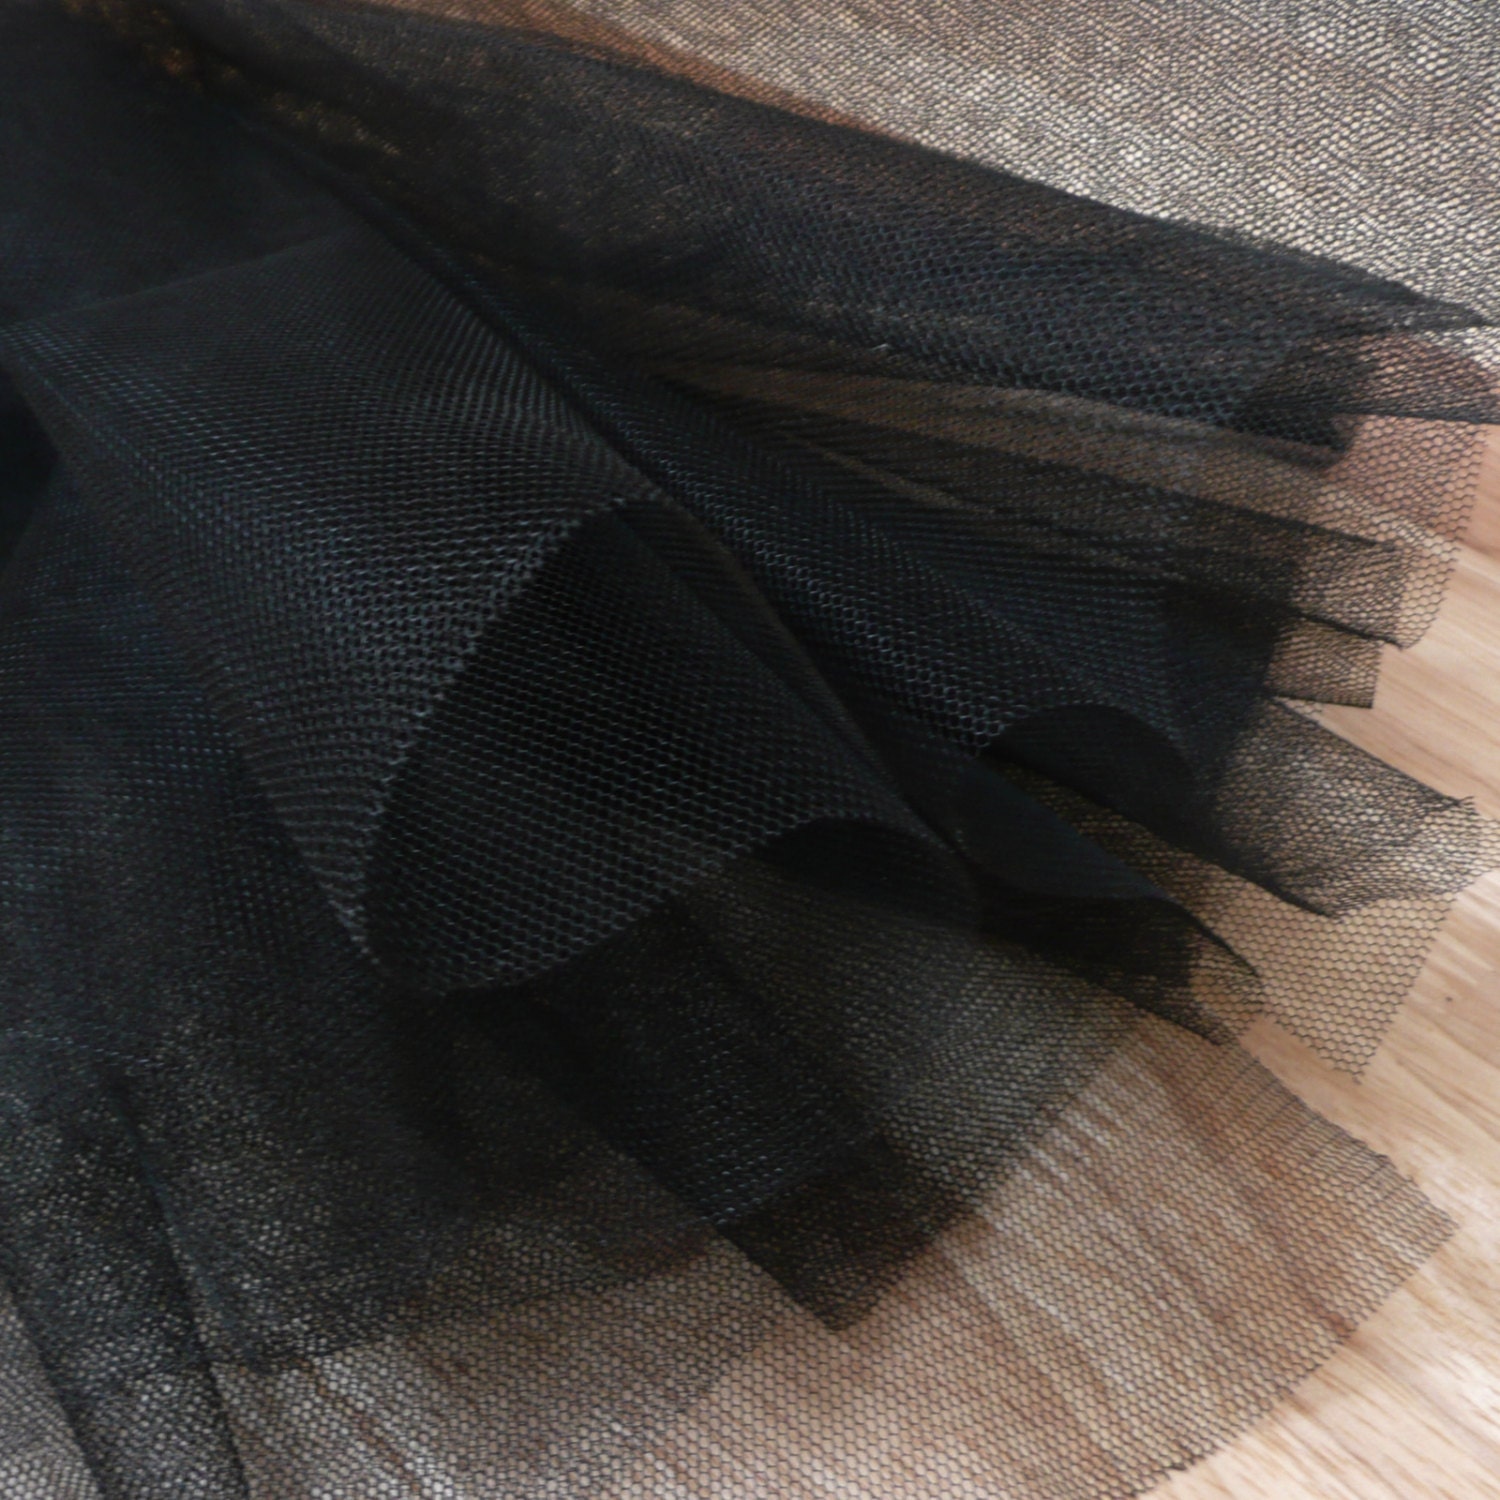 Black Fine Tulle fabric 300cm wide sold by the metre net | Etsy